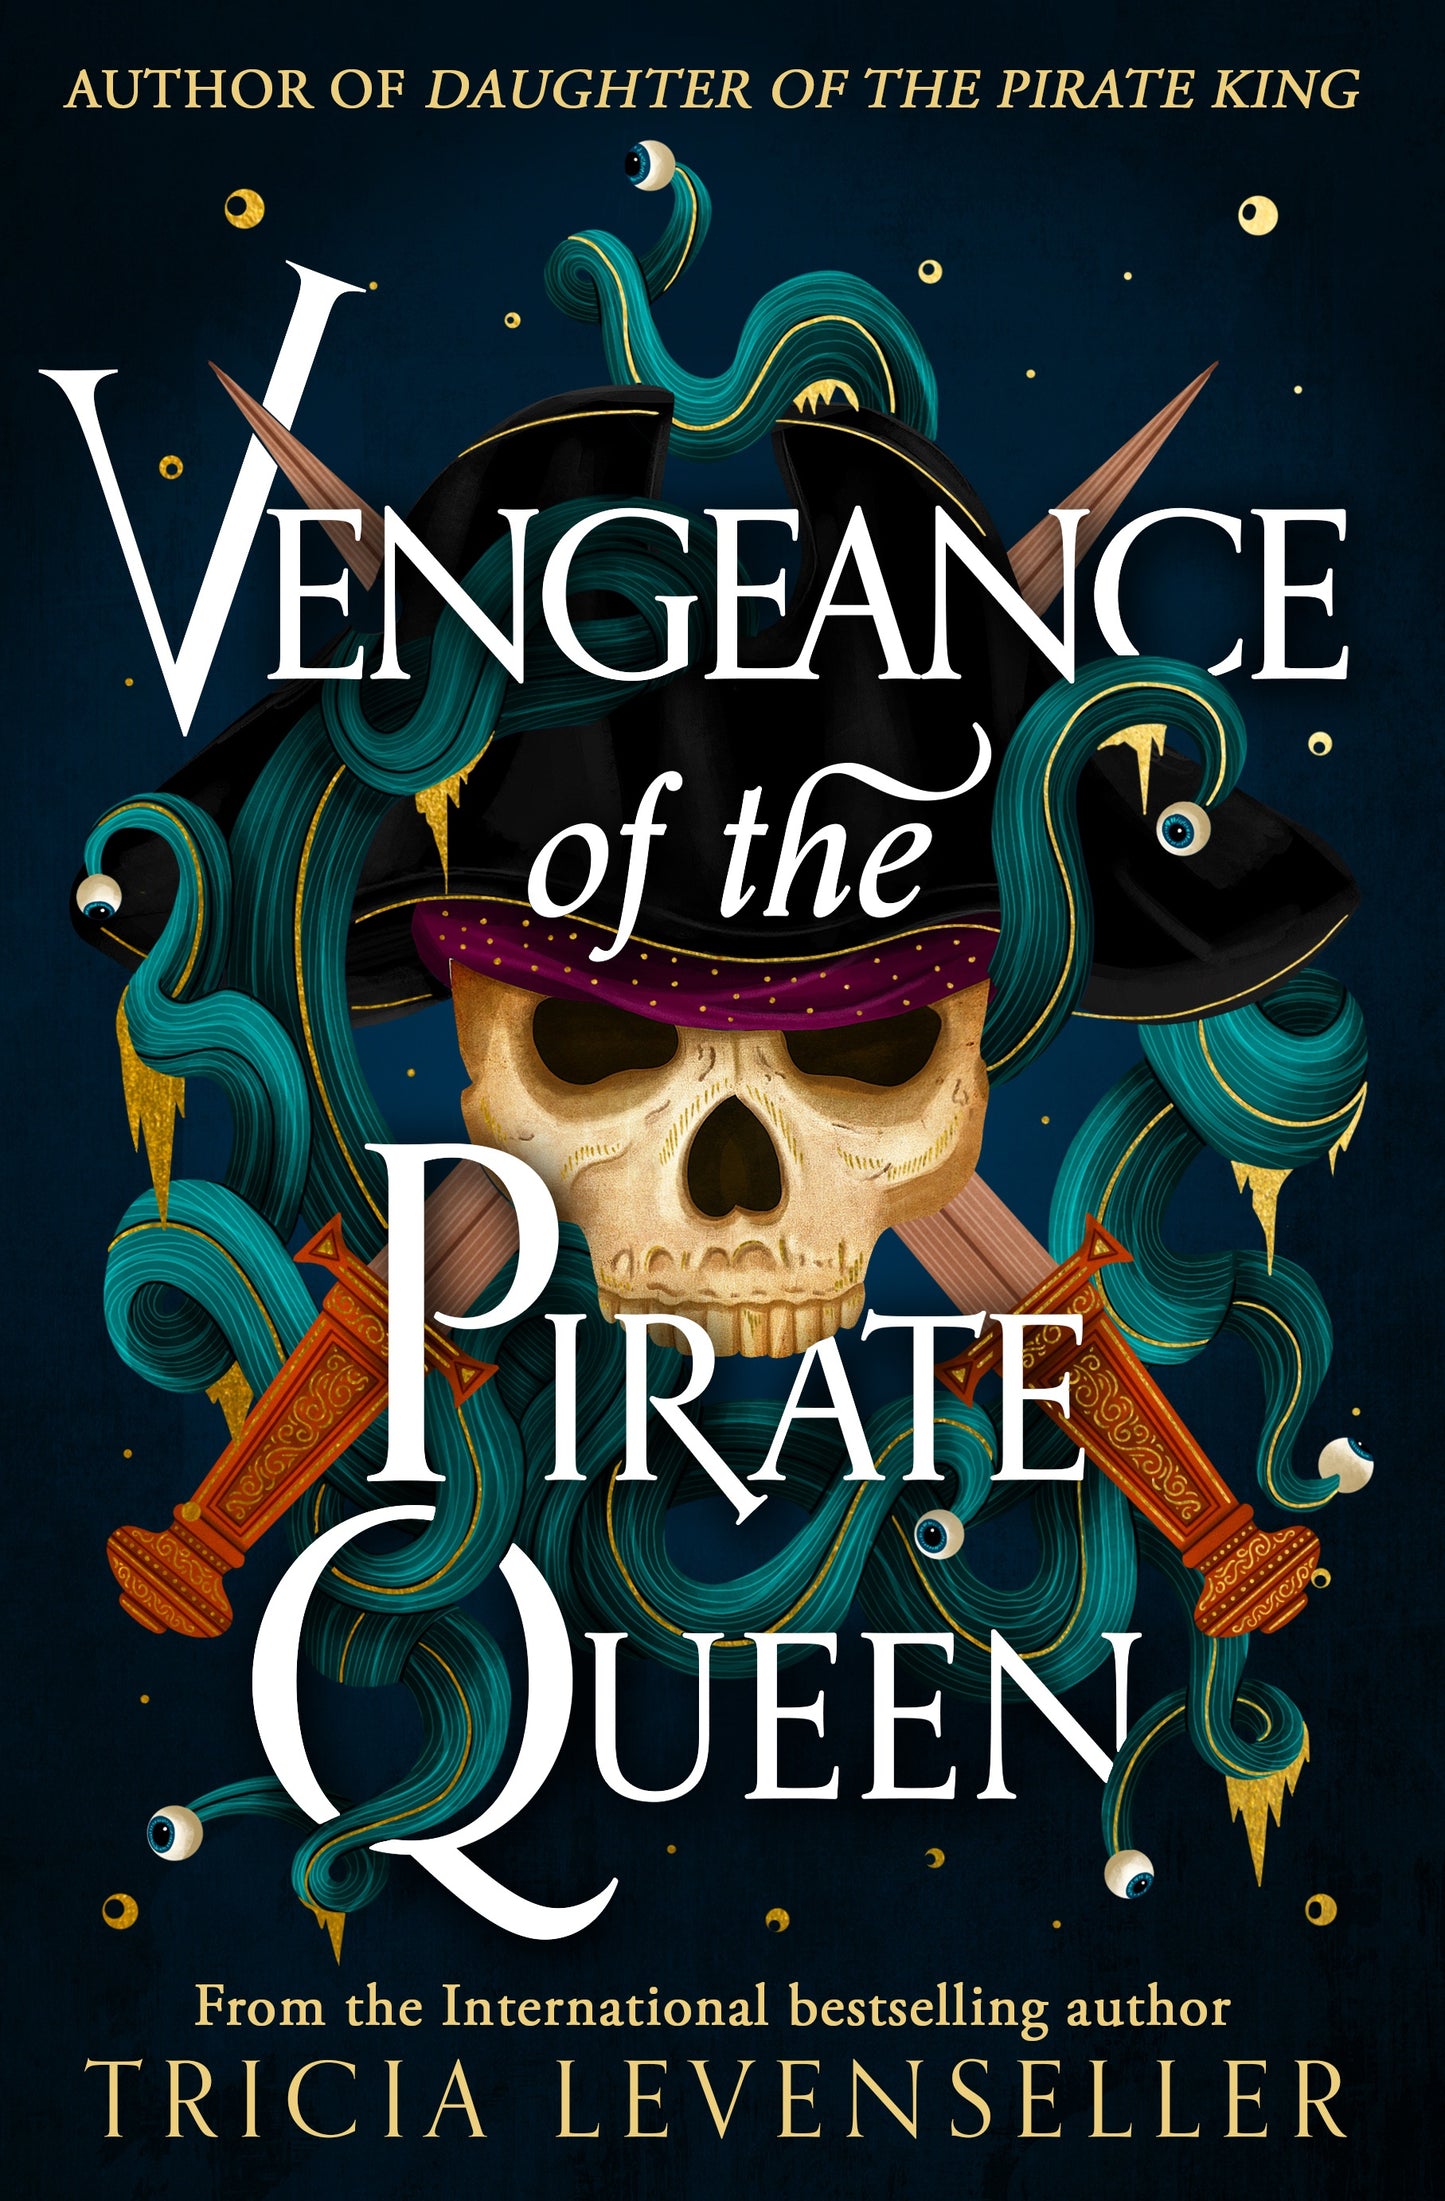 Vengeance of the Pirate Queen Tricia Levenseller